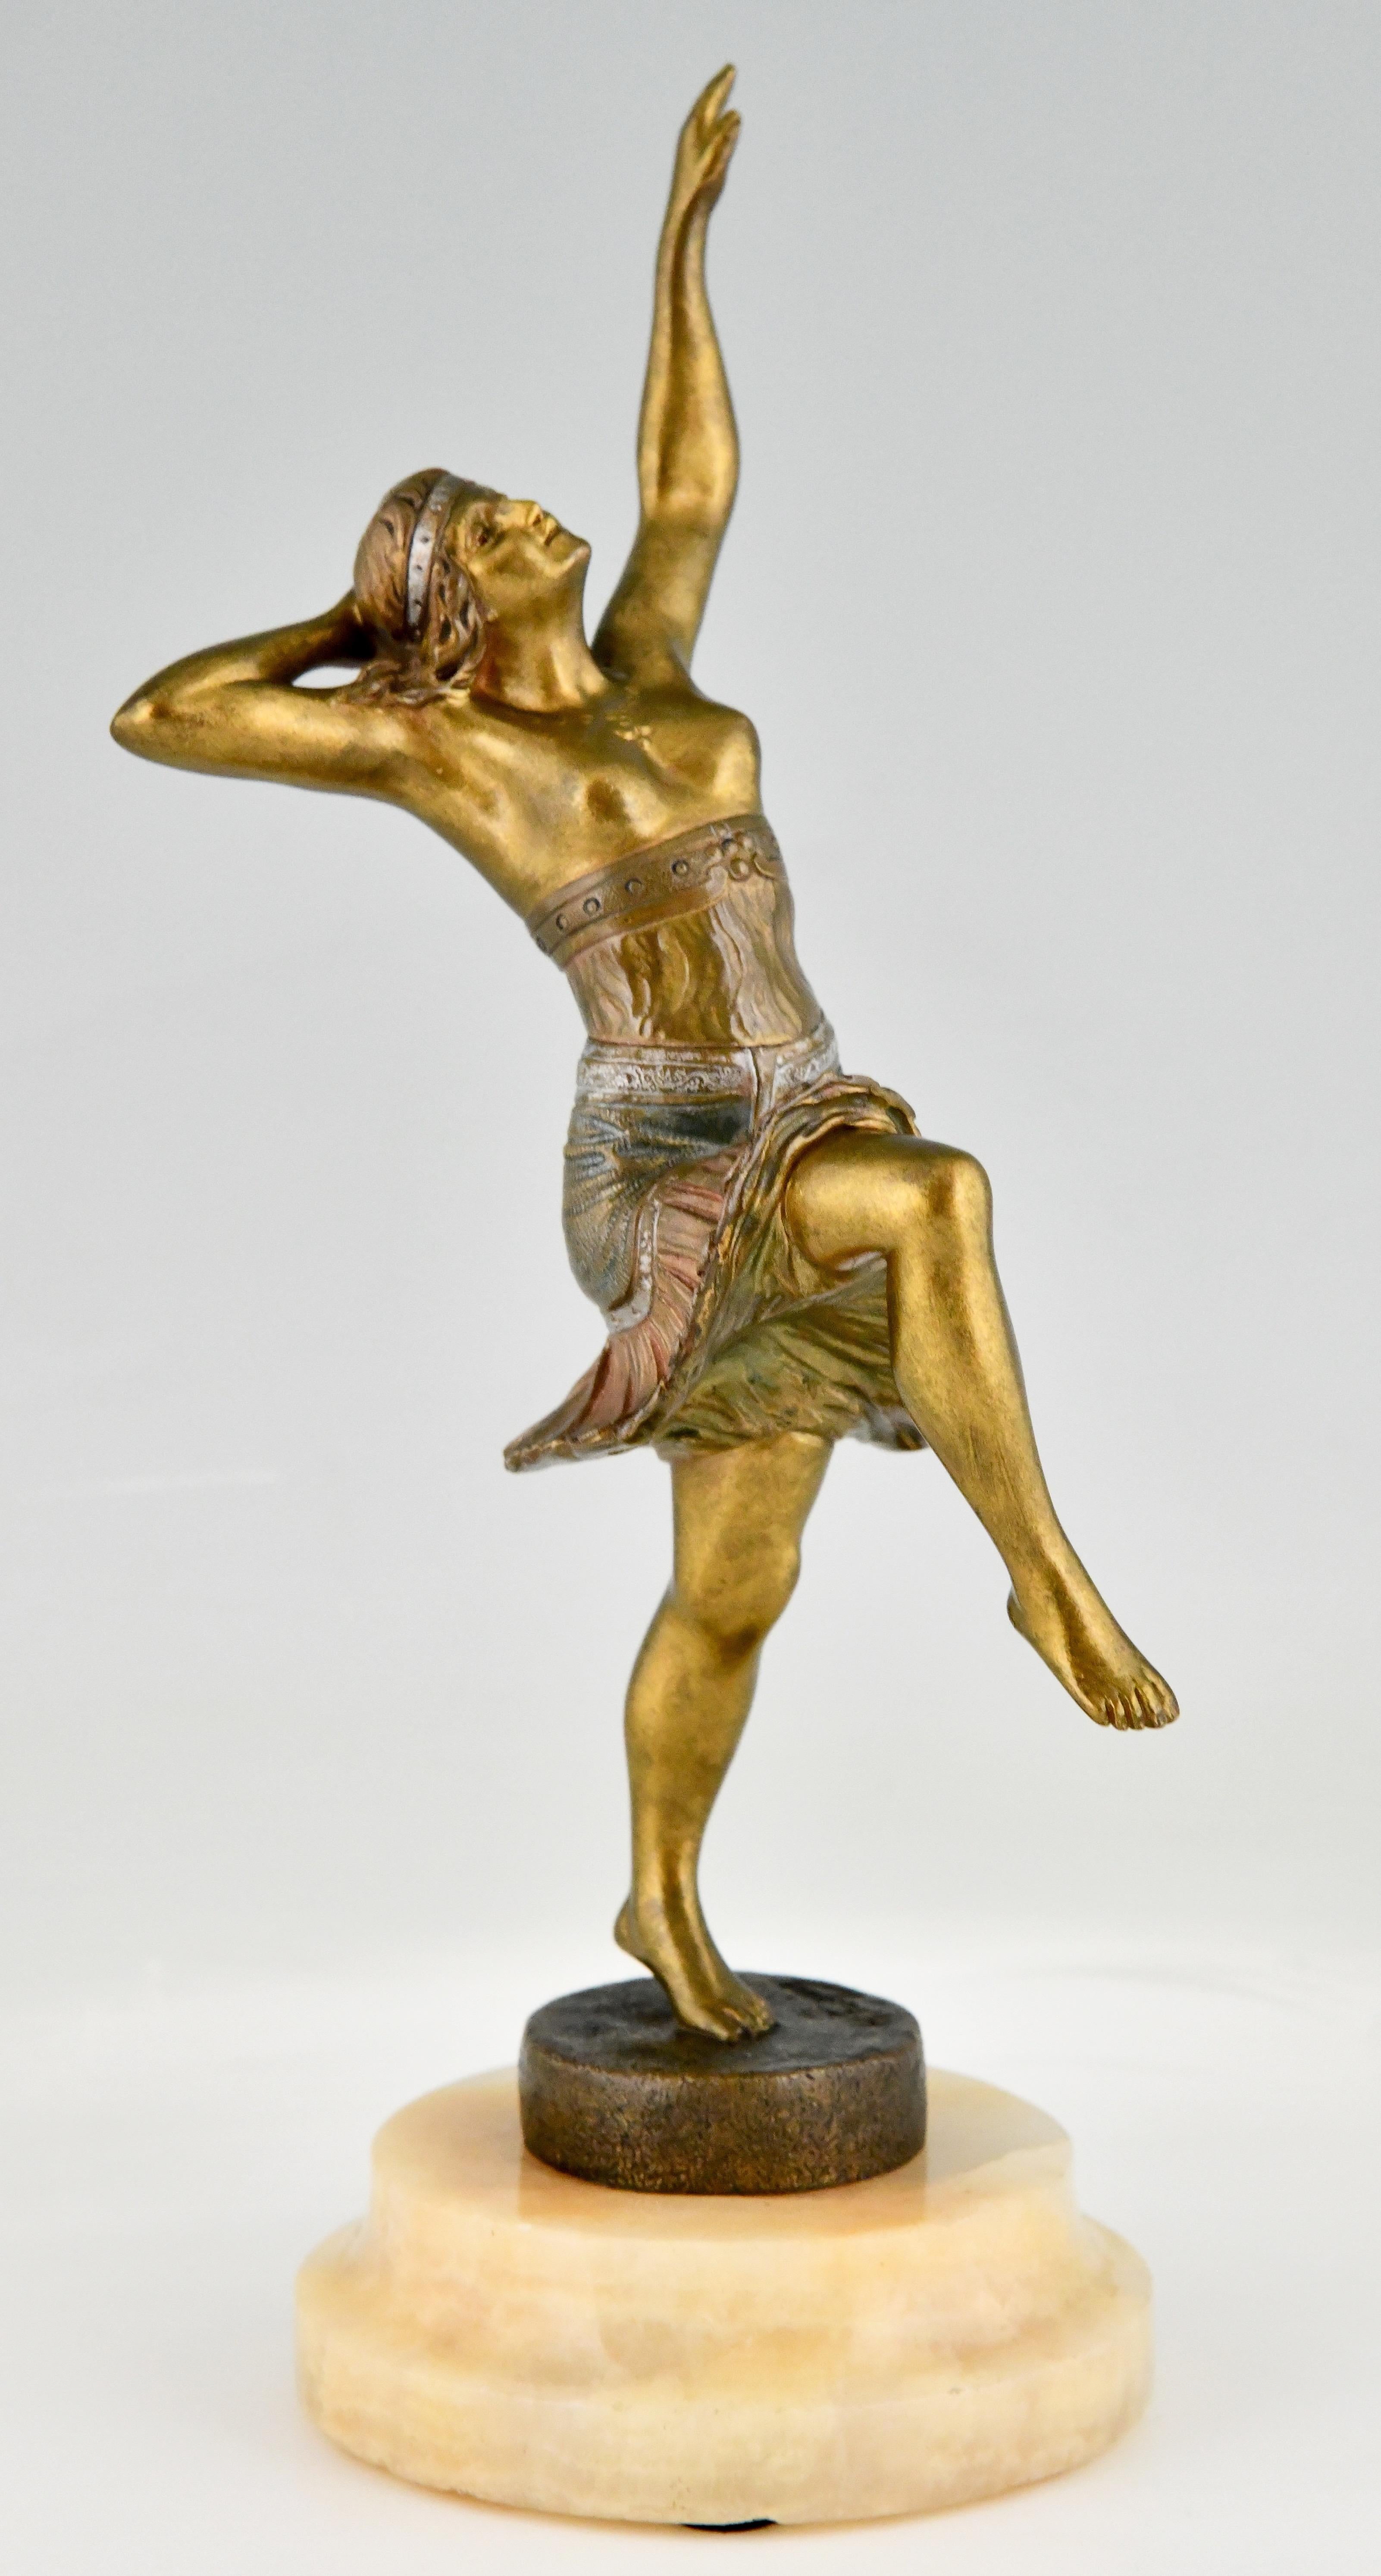 Art Deco bronze sculpture of a dancer signed by Henry Fugère. 
Bronze sculpture of a semi nude dancer in Orientalist dress with multi color patina on a onyx base. 
France 1925.

Literature: 
Art Deco and other figures by Brian Catley
Antique